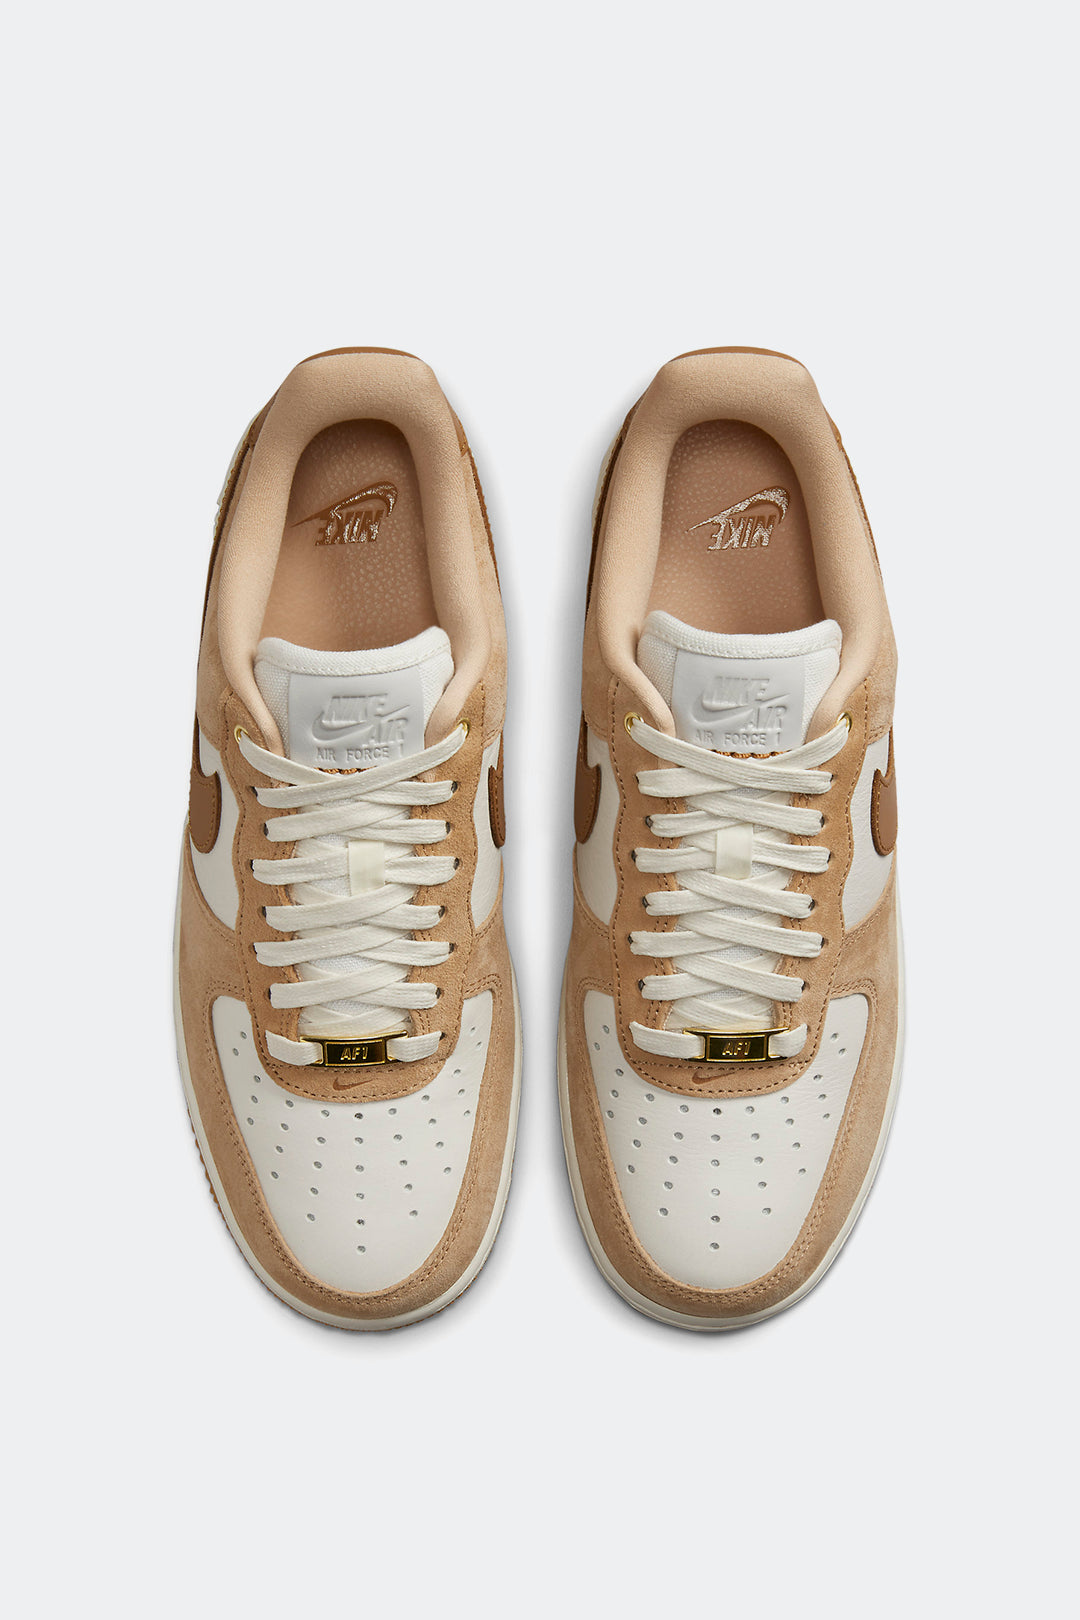 NIKE AIR FORCE 1 LOW LXX "VECHETTA TAN" - MUJER - HYPE